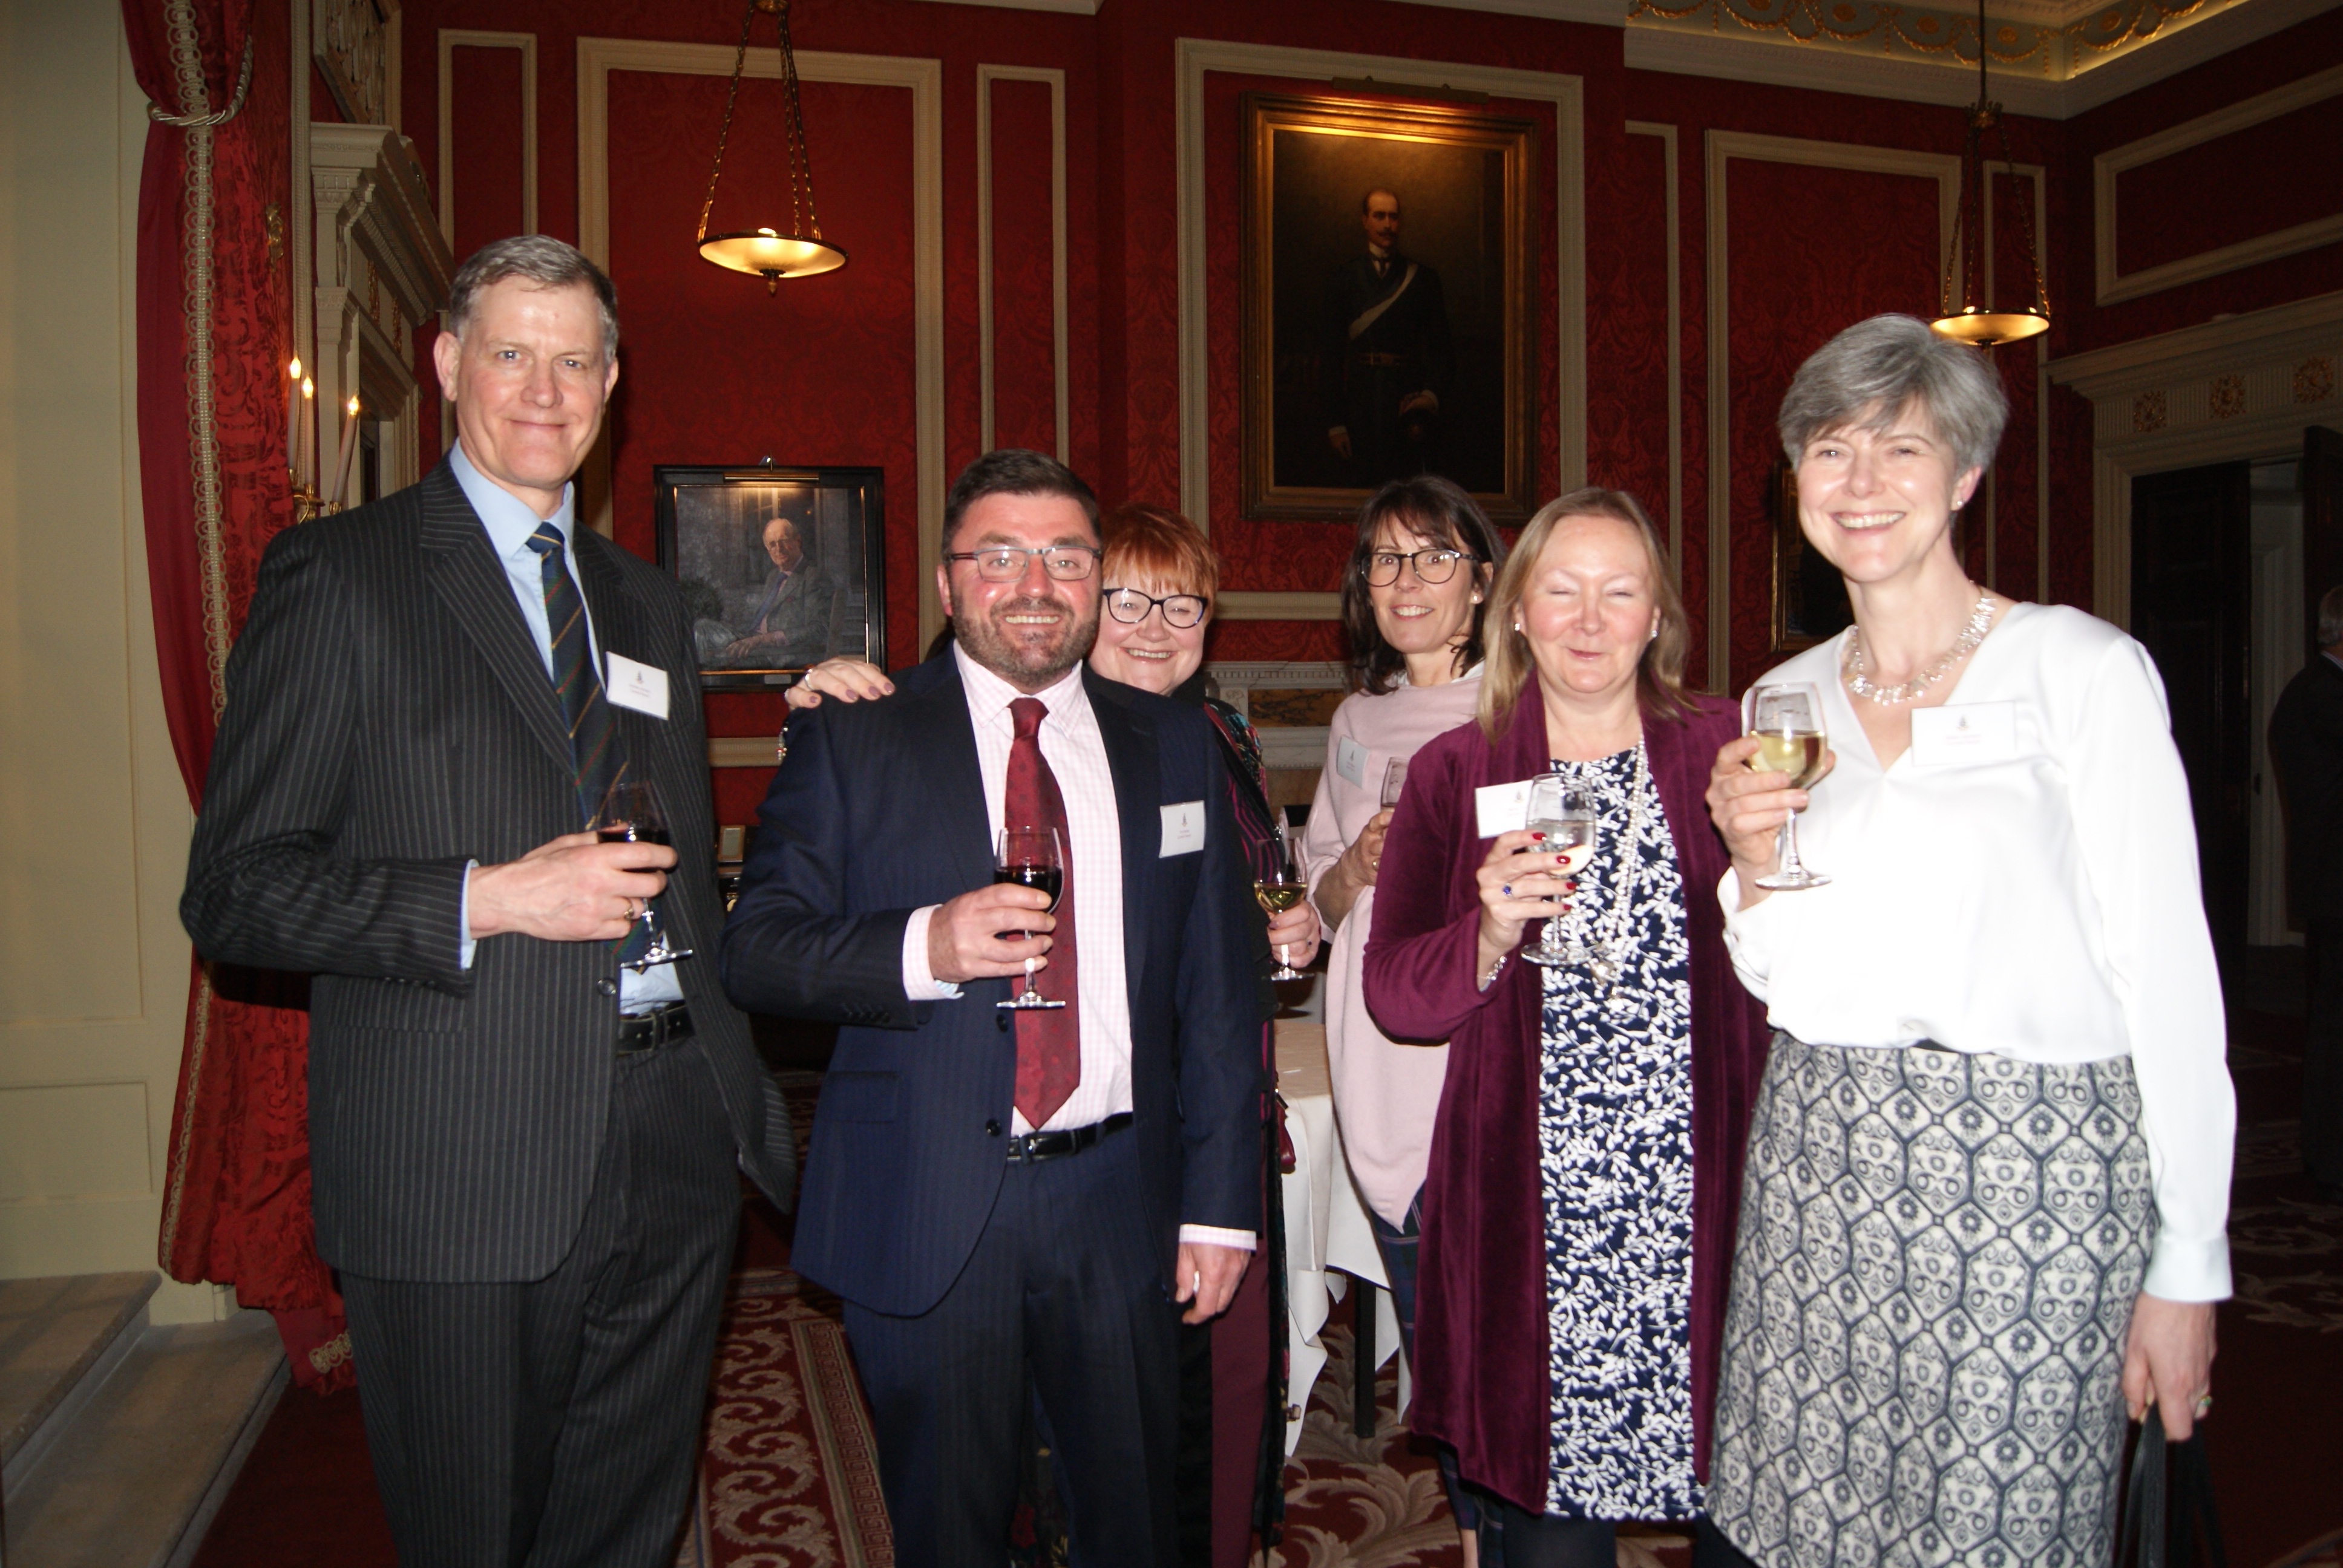 The Tenth Annual Foundation Lecture 2019 at the RAC Club (Guest Speaker: Dr Sonya Hill)